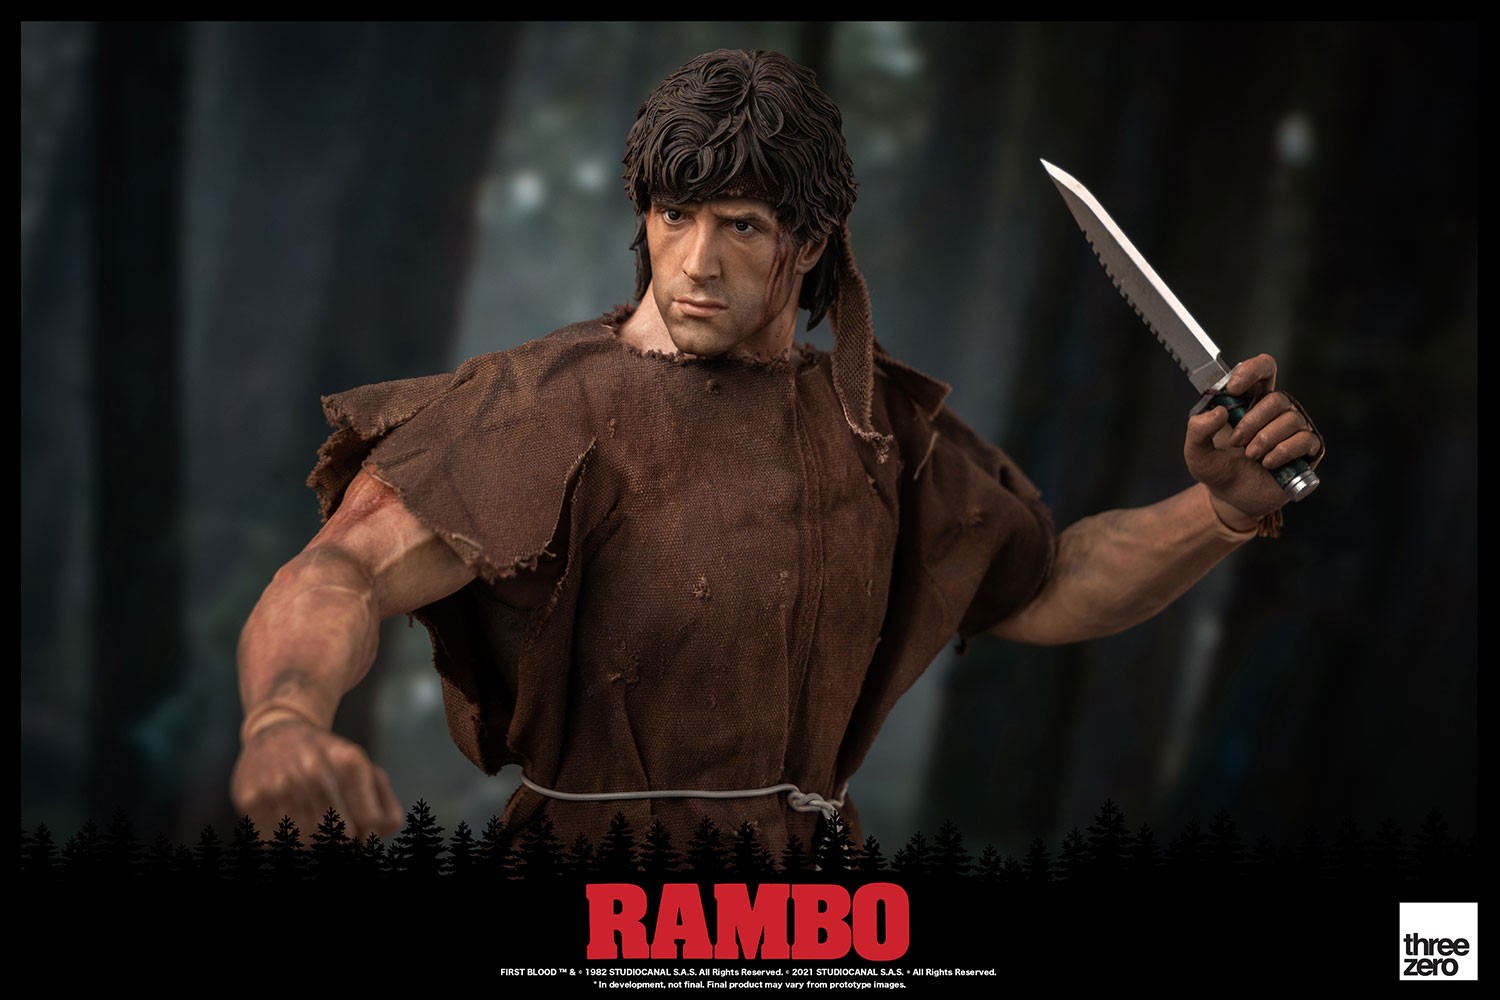 Rambo: First Blood (Prototype Shown) View 2